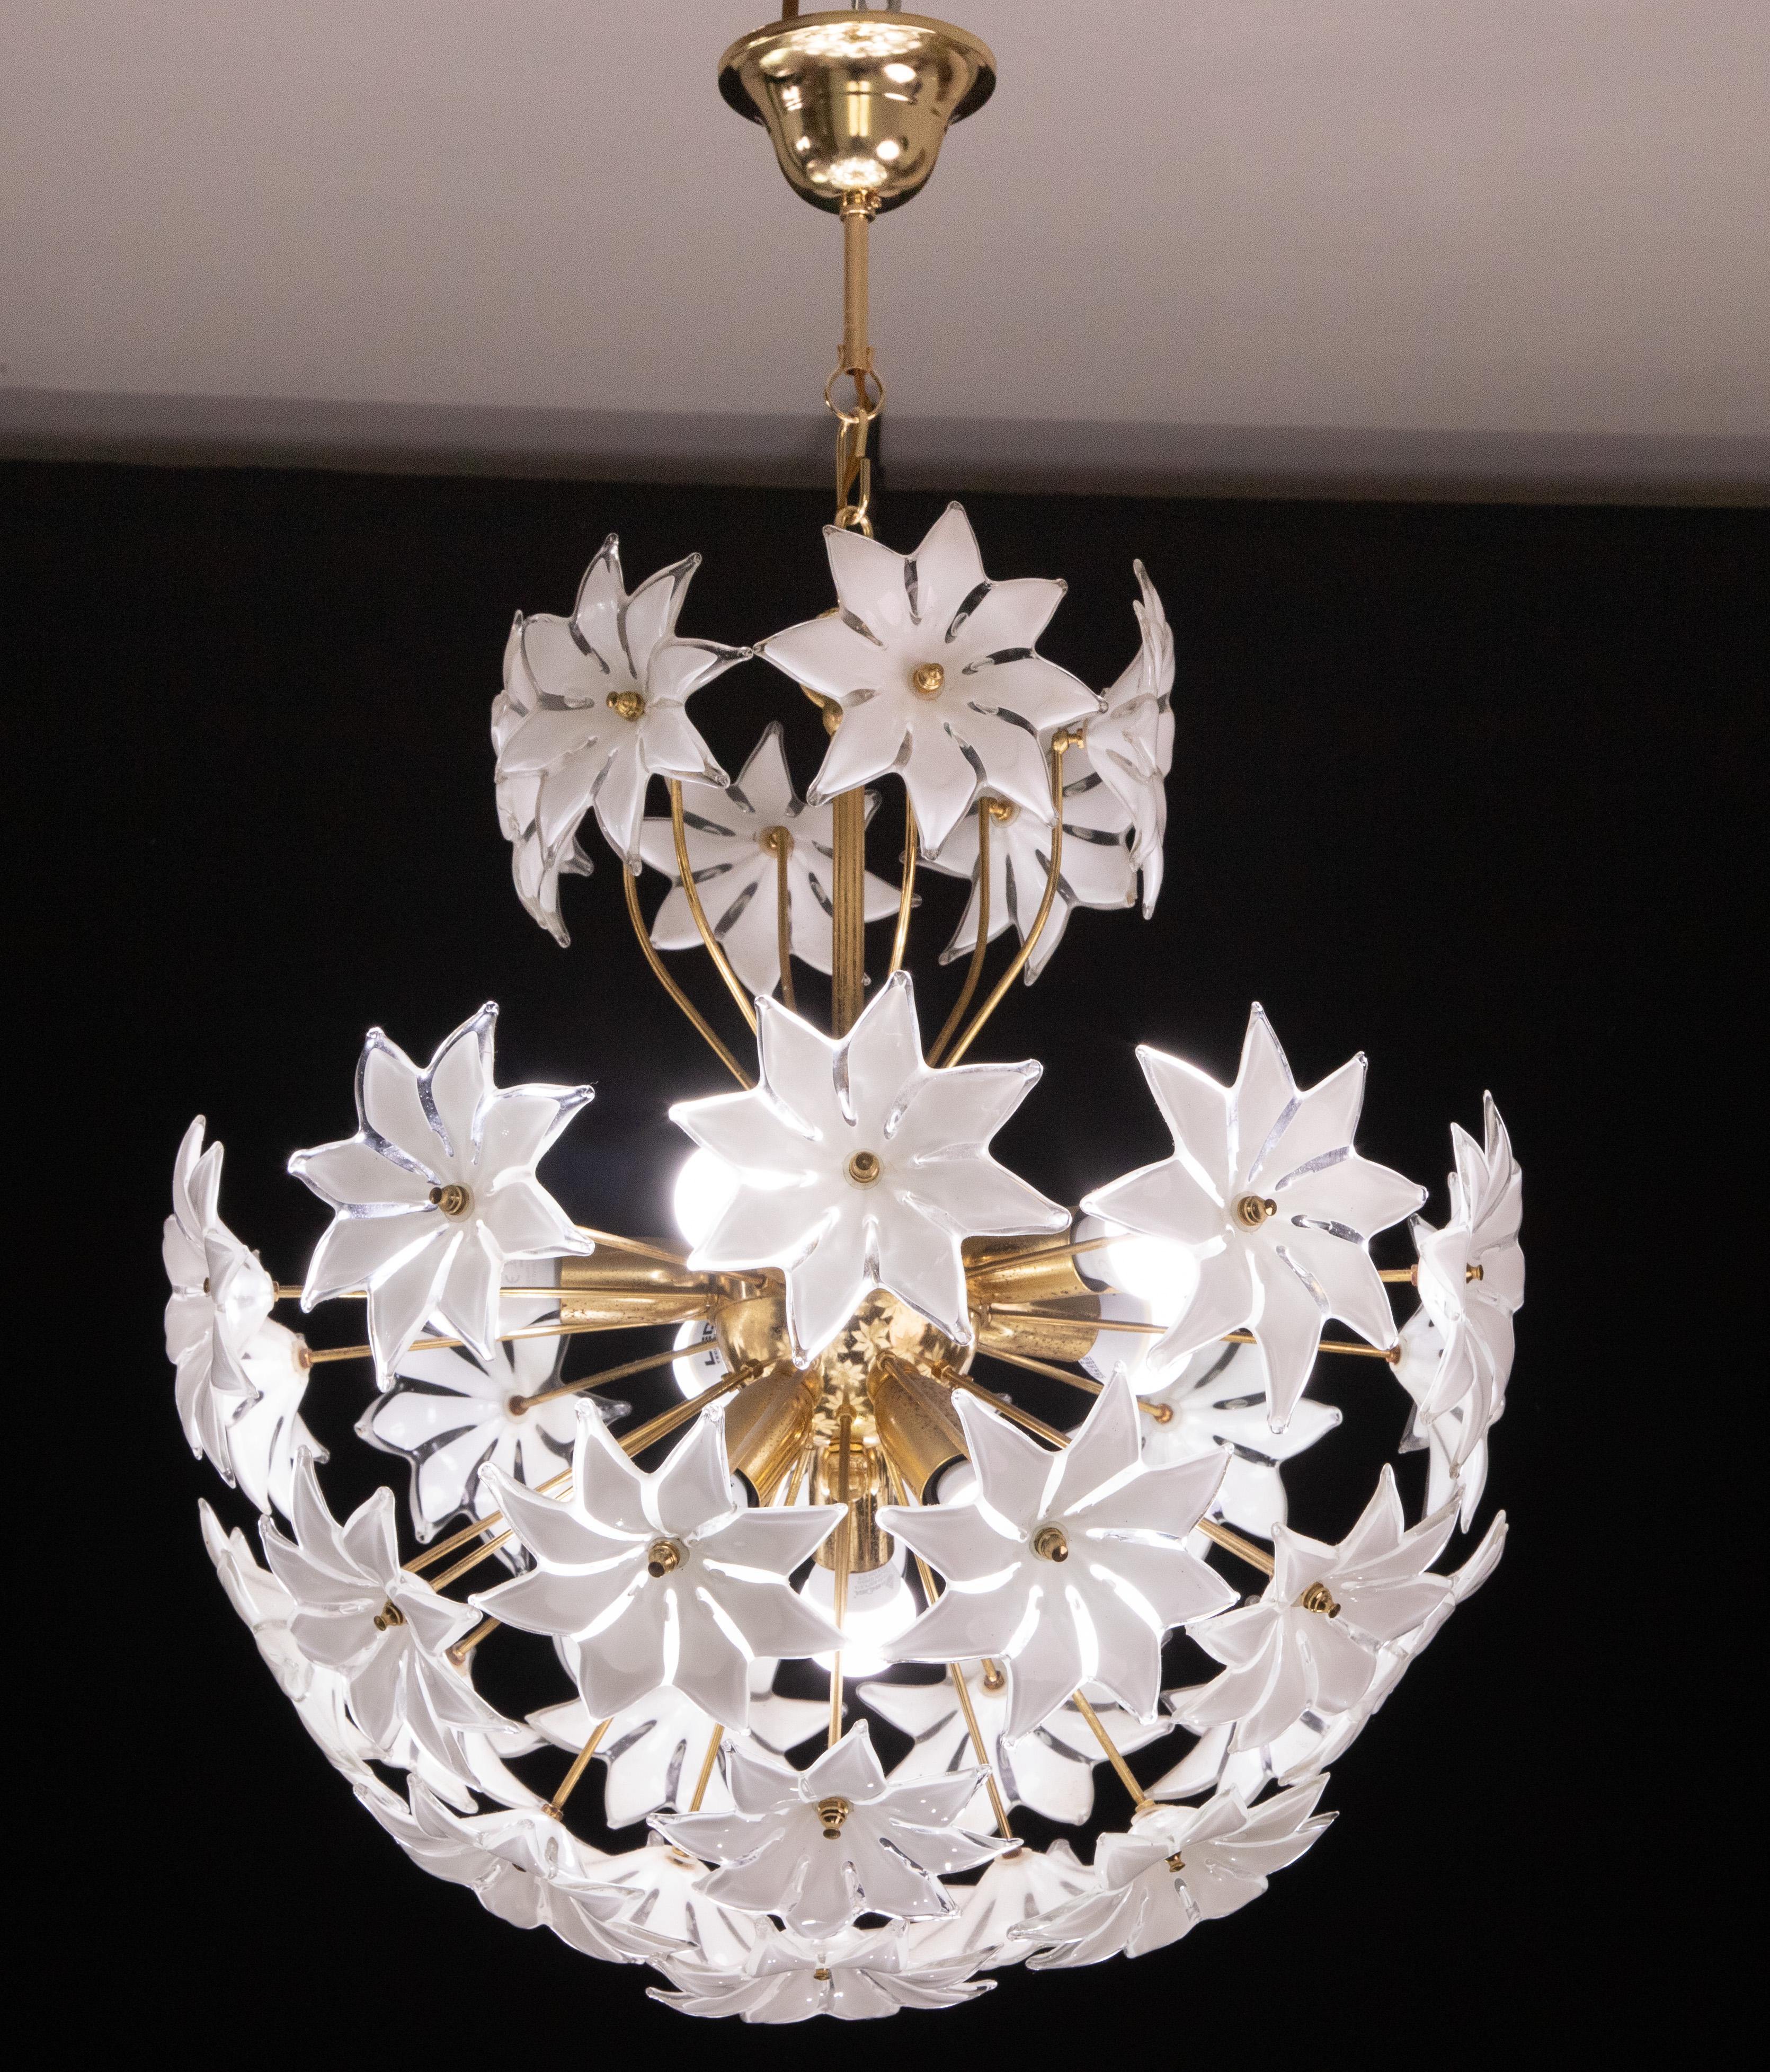 Vintage Murano glass chandelier with glass flowers.
Gold bath frame, some small signs of time that gives authenticity and charm.
The chandelier has 10 light points with E14 socket.
The height of the chandelier is 85 cm, the width of the